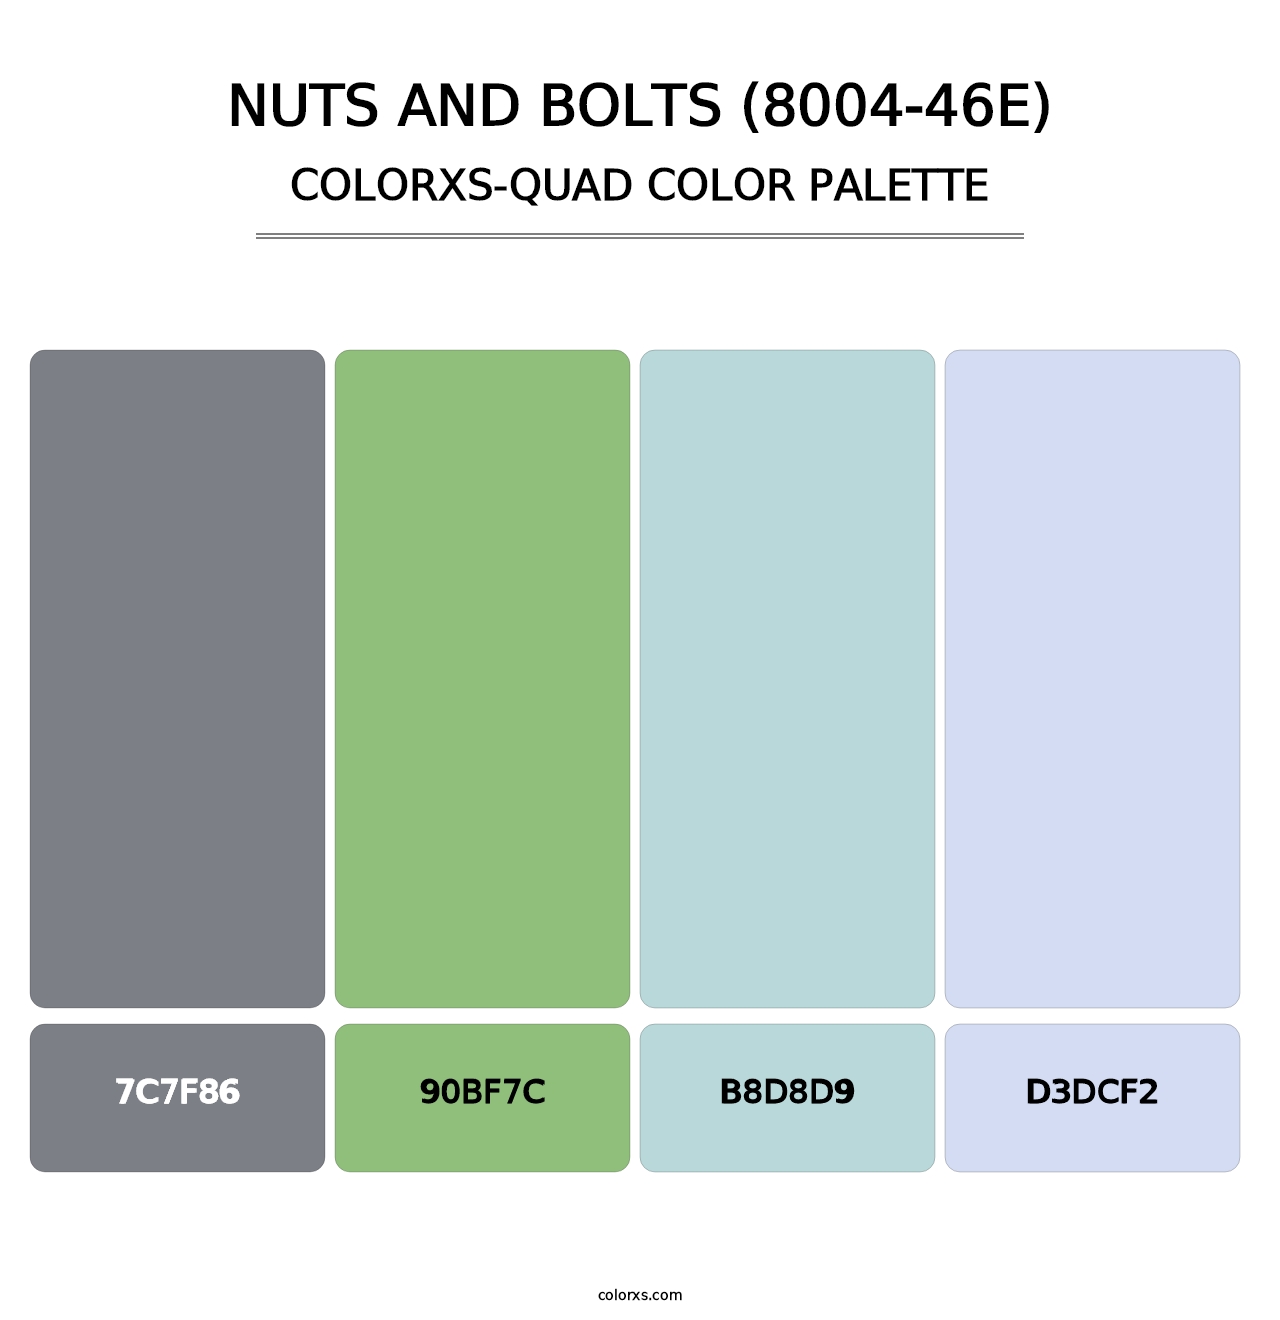 Nuts and Bolts (8004-46E) - Colorxs Quad Palette